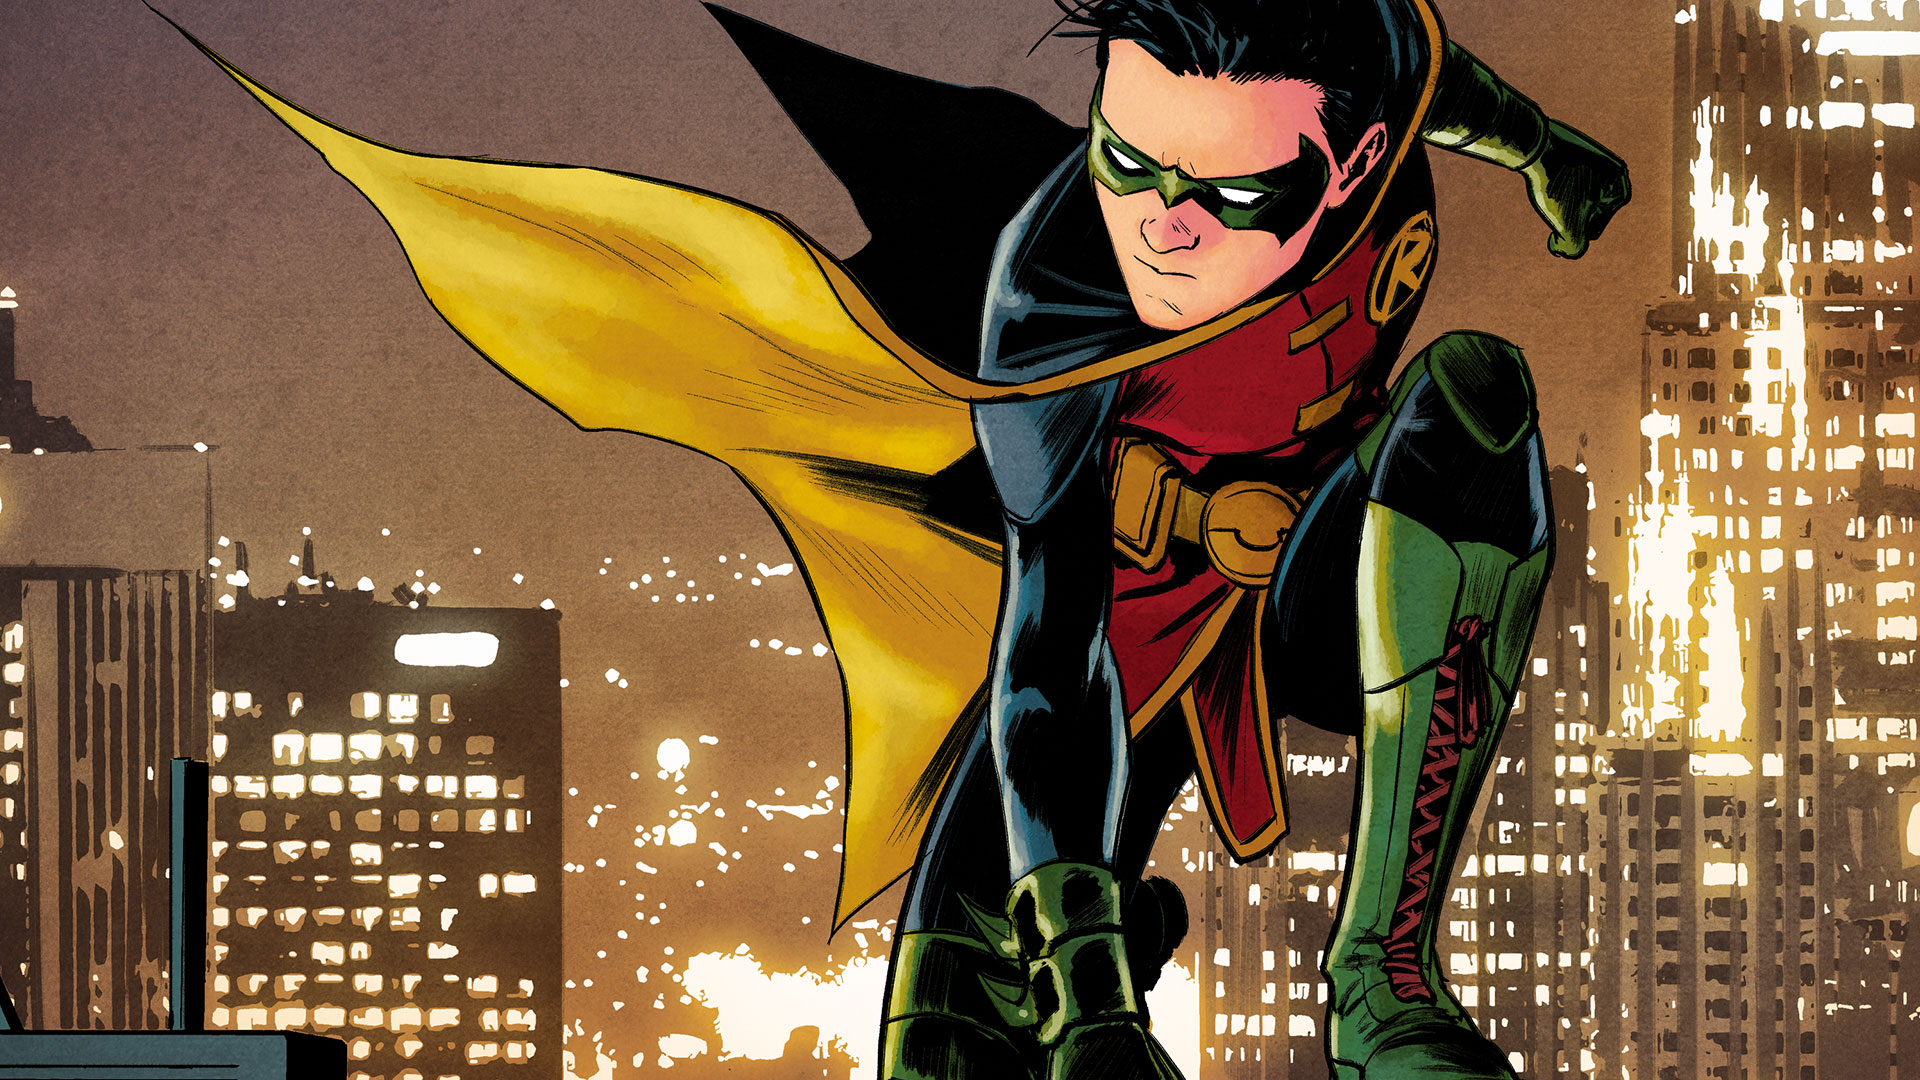 Download Damian Son Of Batman wallpapers for mobile phone free Damian  Son Of Batman HD pictures